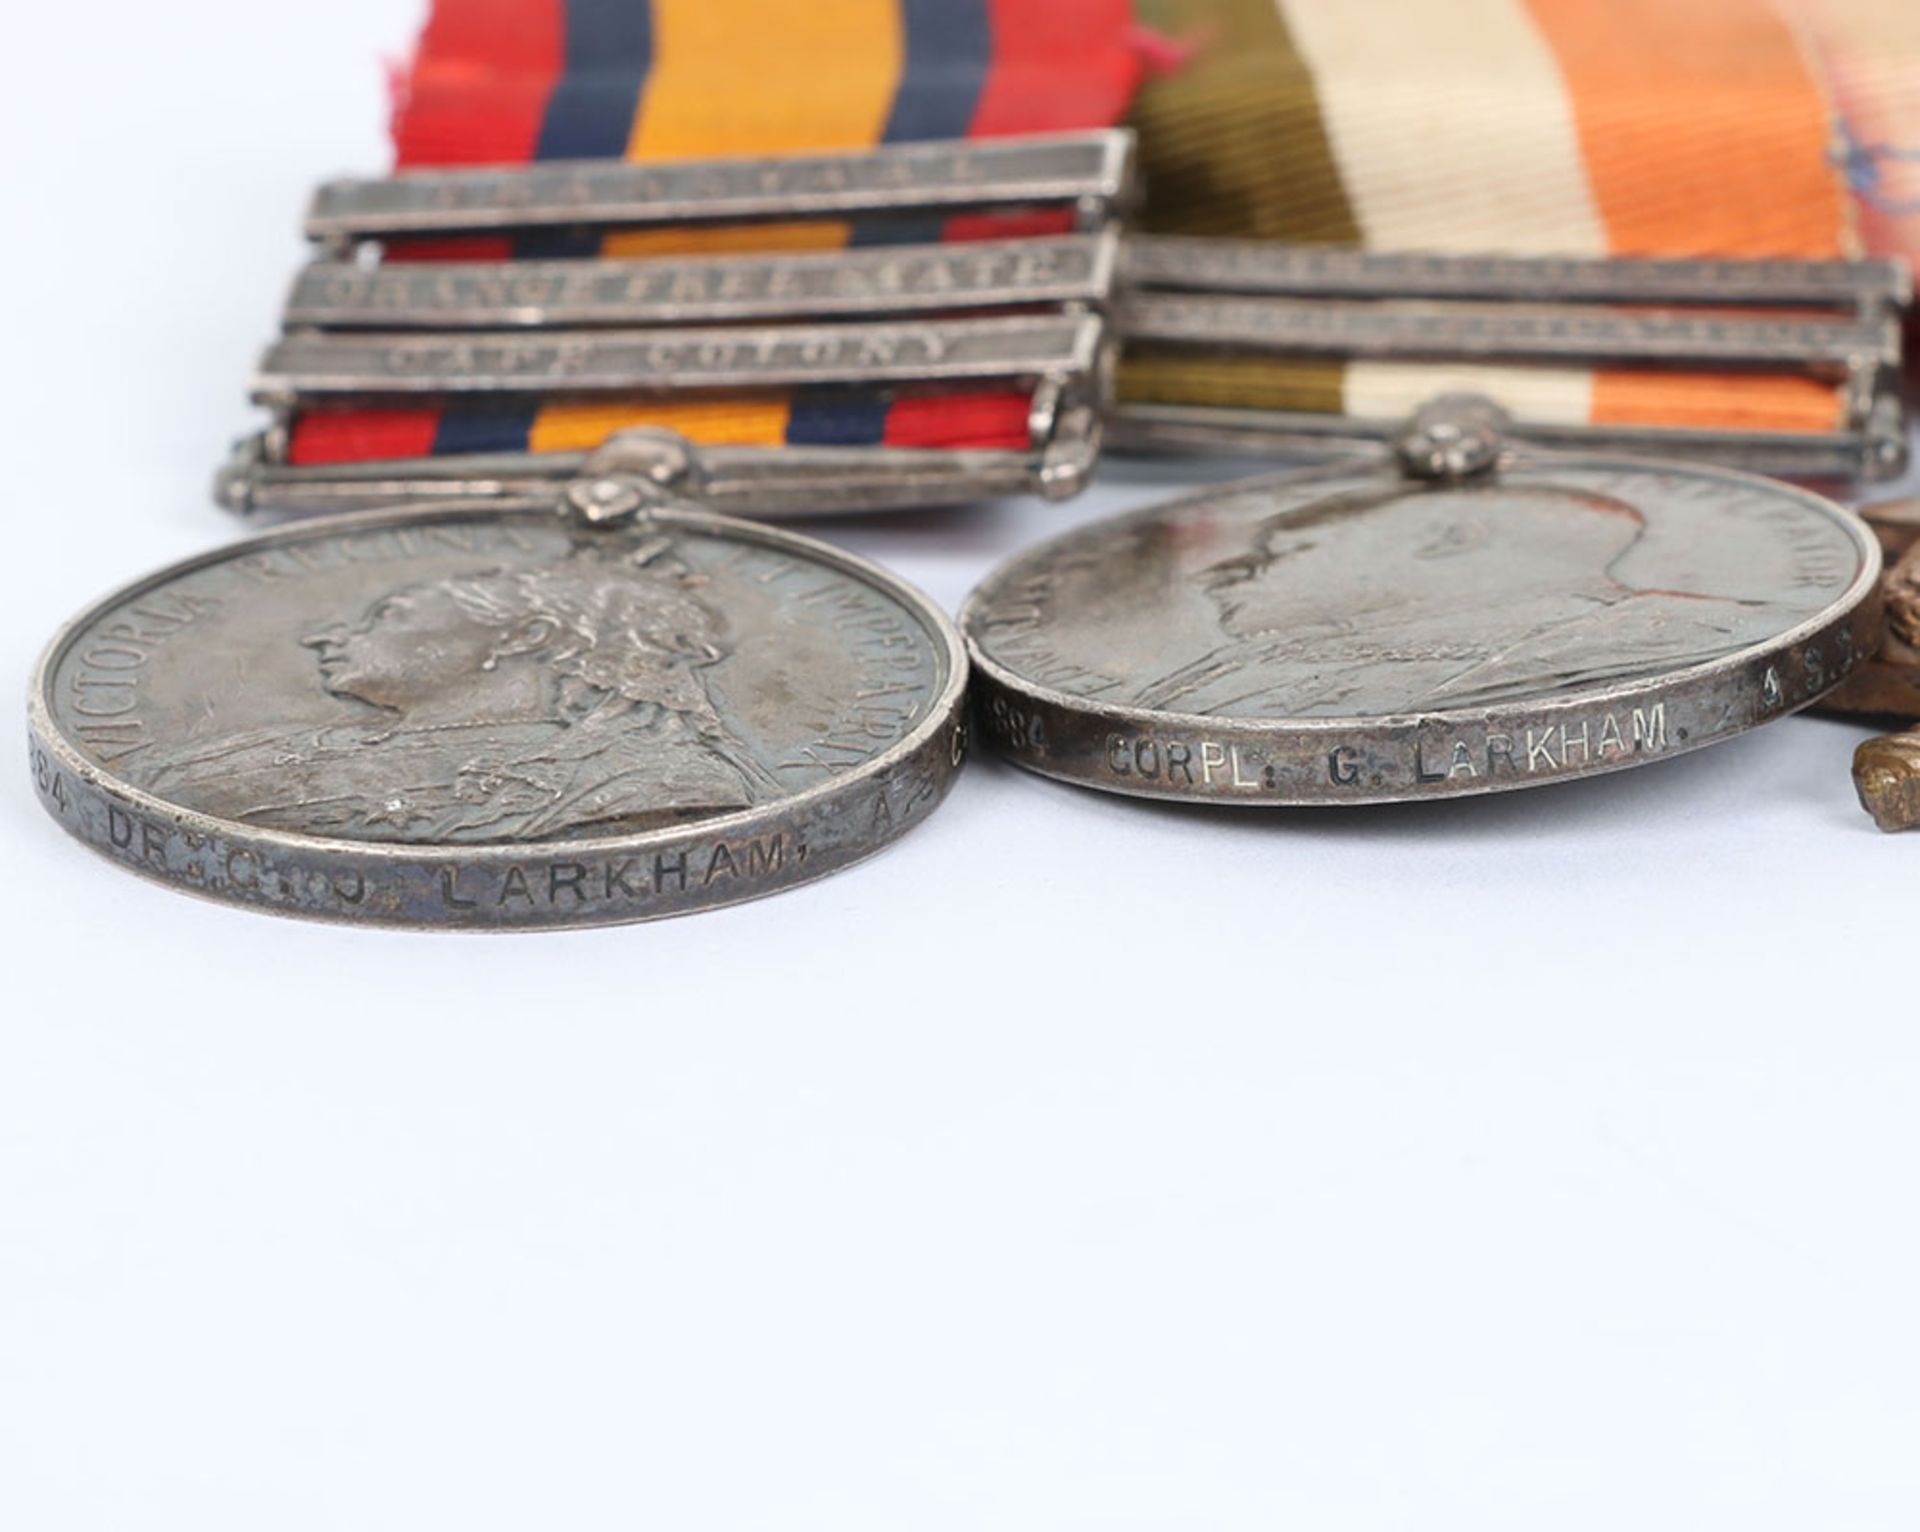 Campaign Medal Group of Six Covering Three Conflicts Over an Impressive 40 Year Period - Image 8 of 9